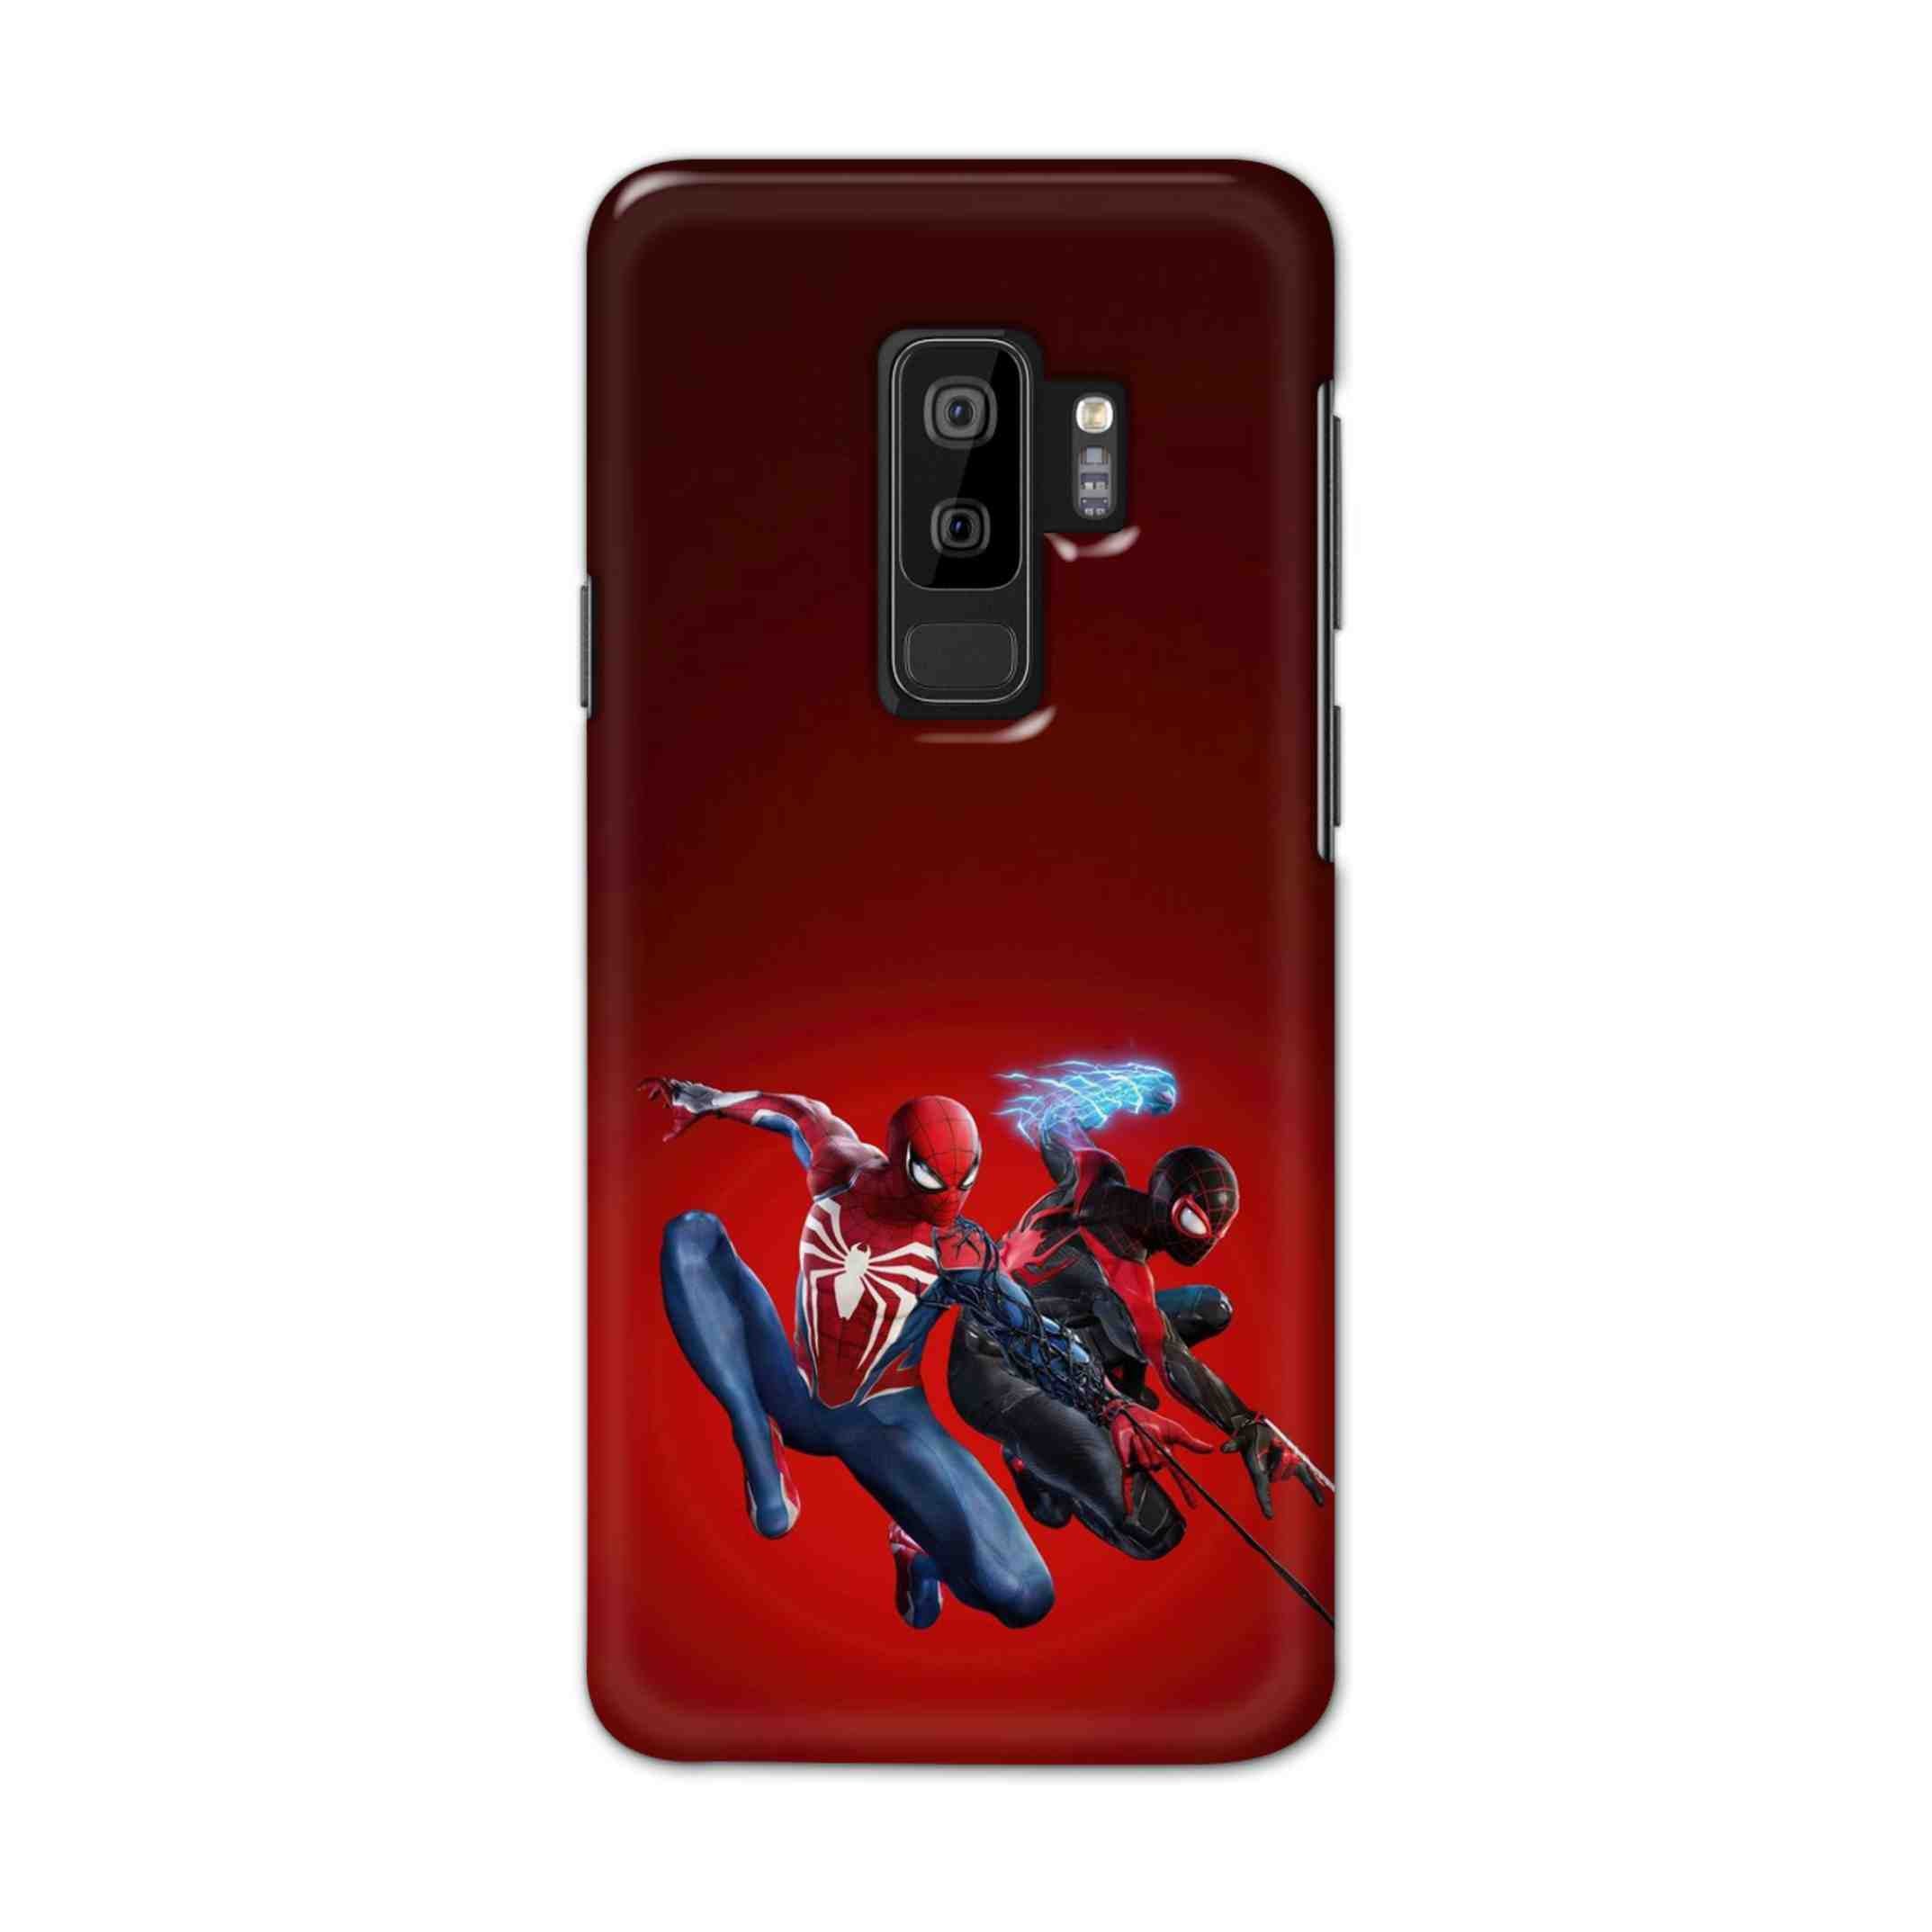 Buy Spiderman And Miles Morales Hard Back Mobile Phone Case Cover For Samsung S9 plus Online